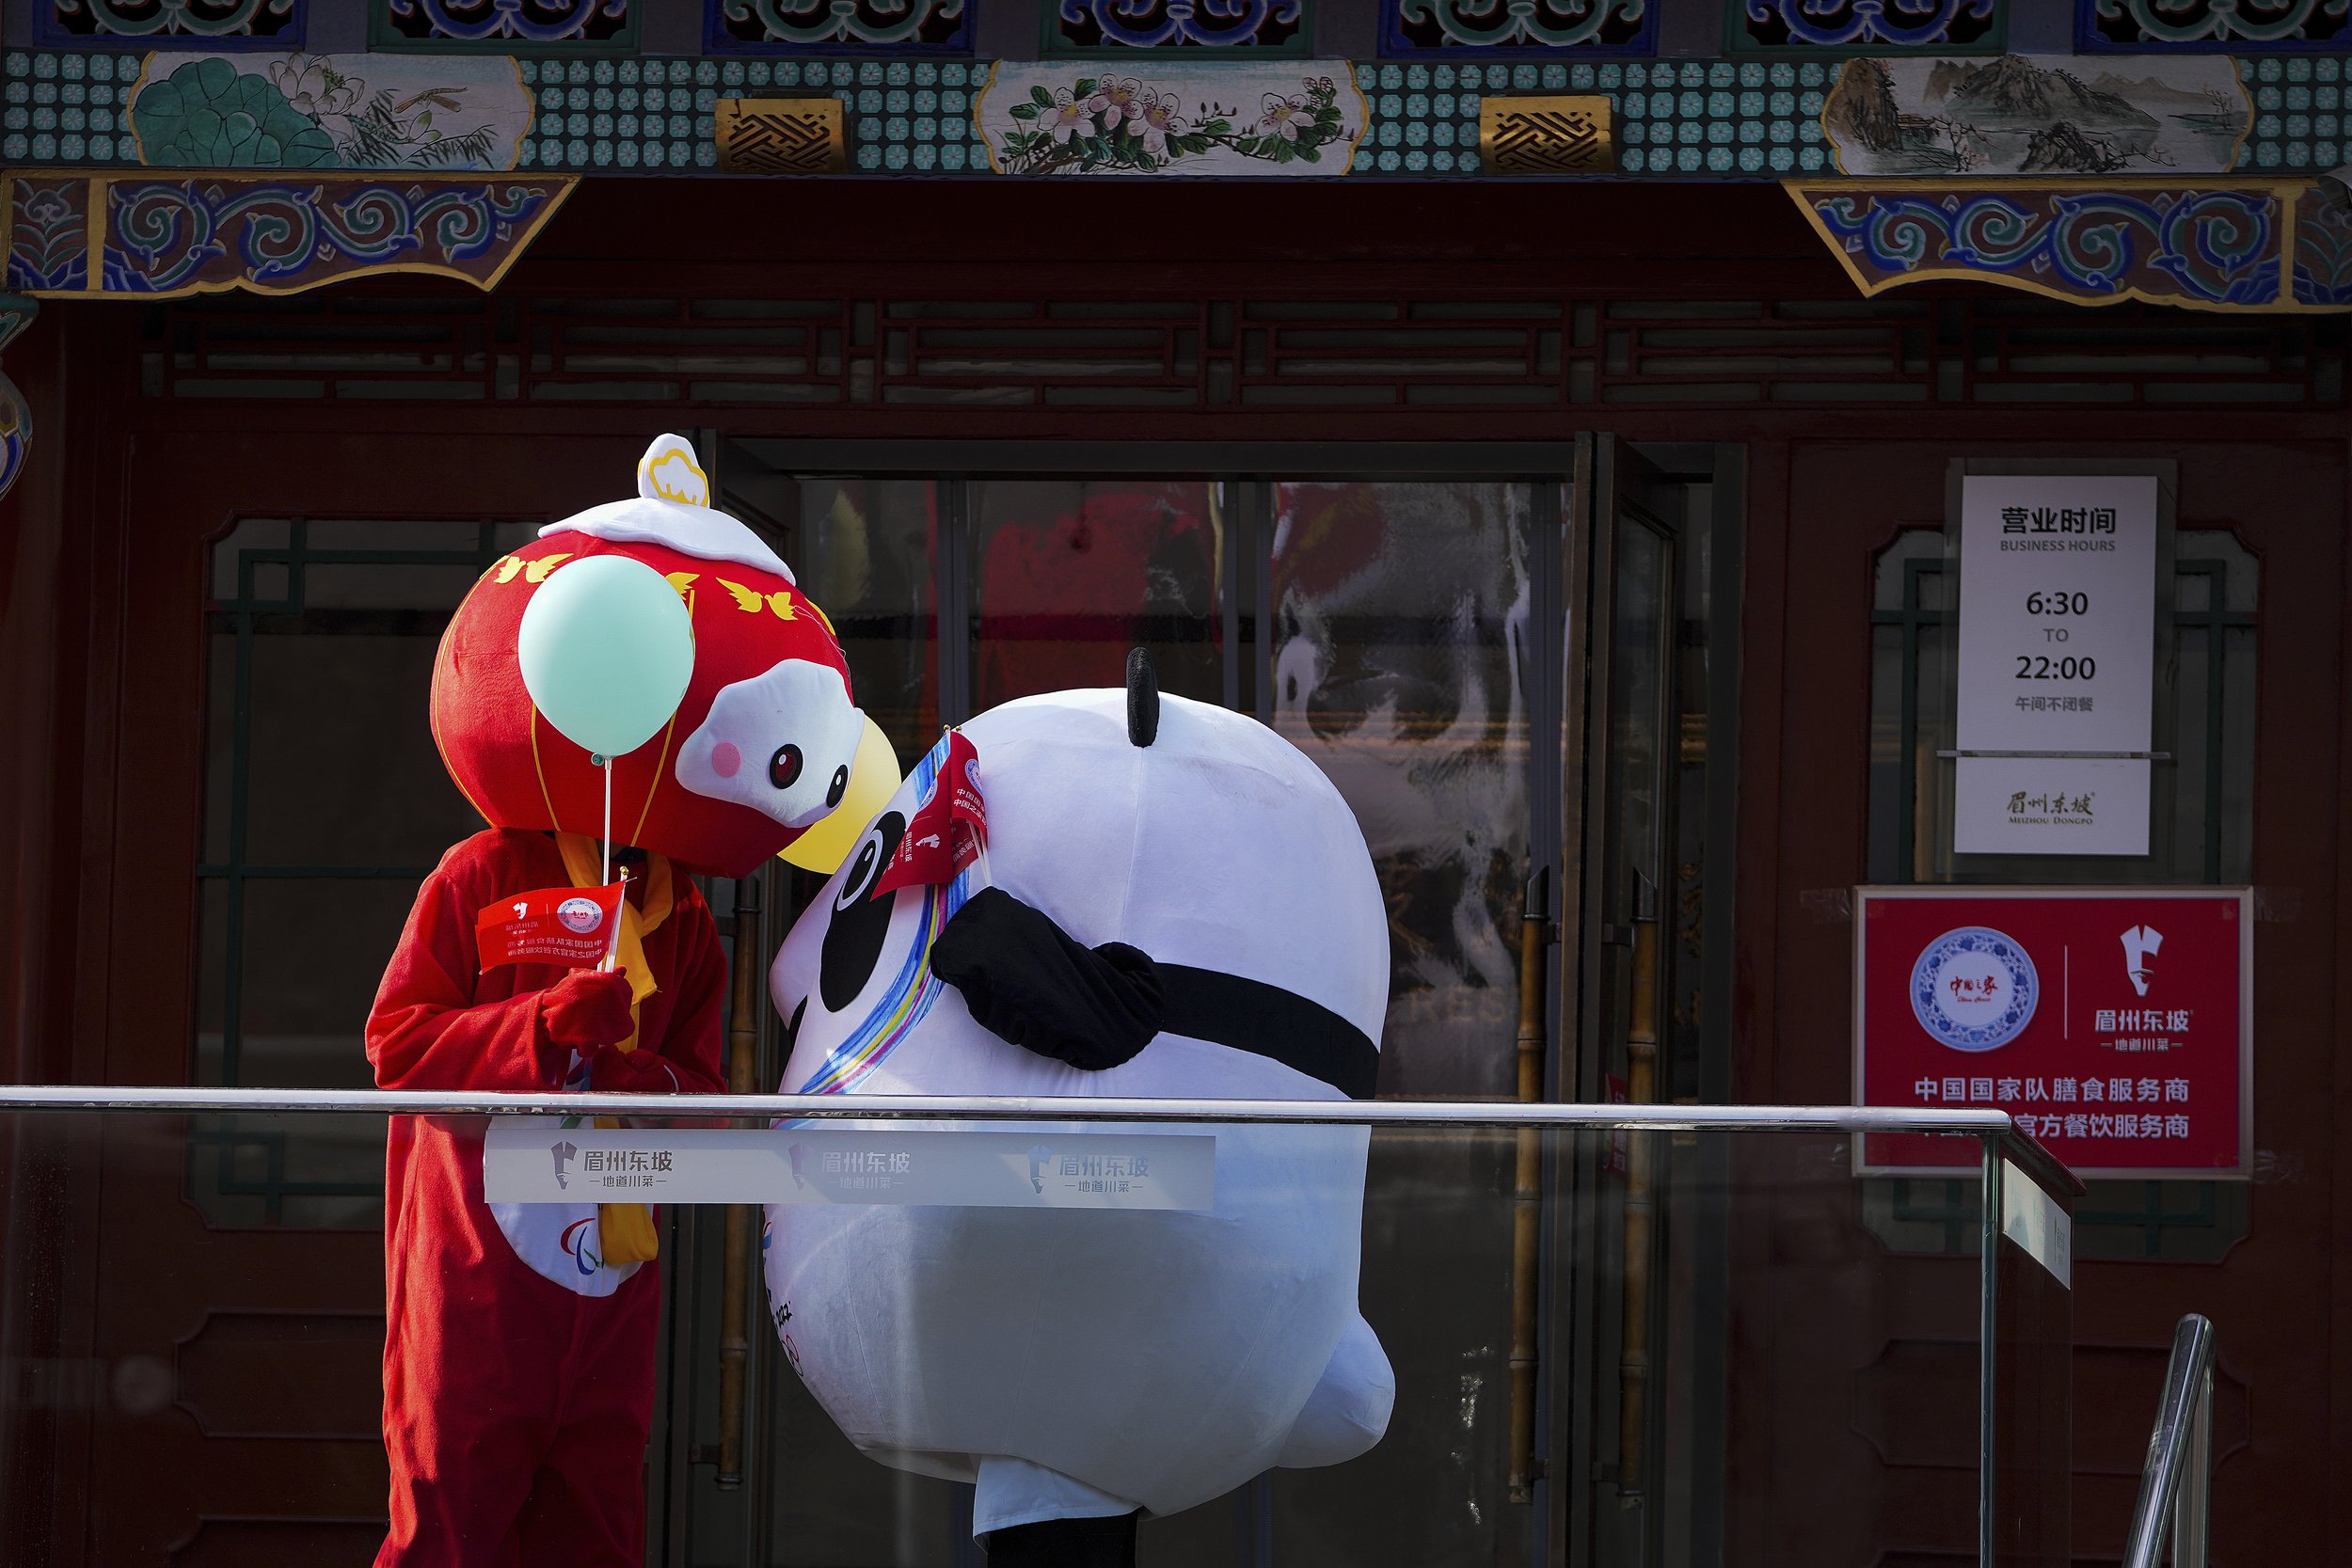  Workers wearing the mascot costumes of the Winter Olympics to attract customers chat outside a restaurant during the Lunar New Year Eve in Beijing, Jan. 31, 2022. (AP Photo/Andy Wong) 